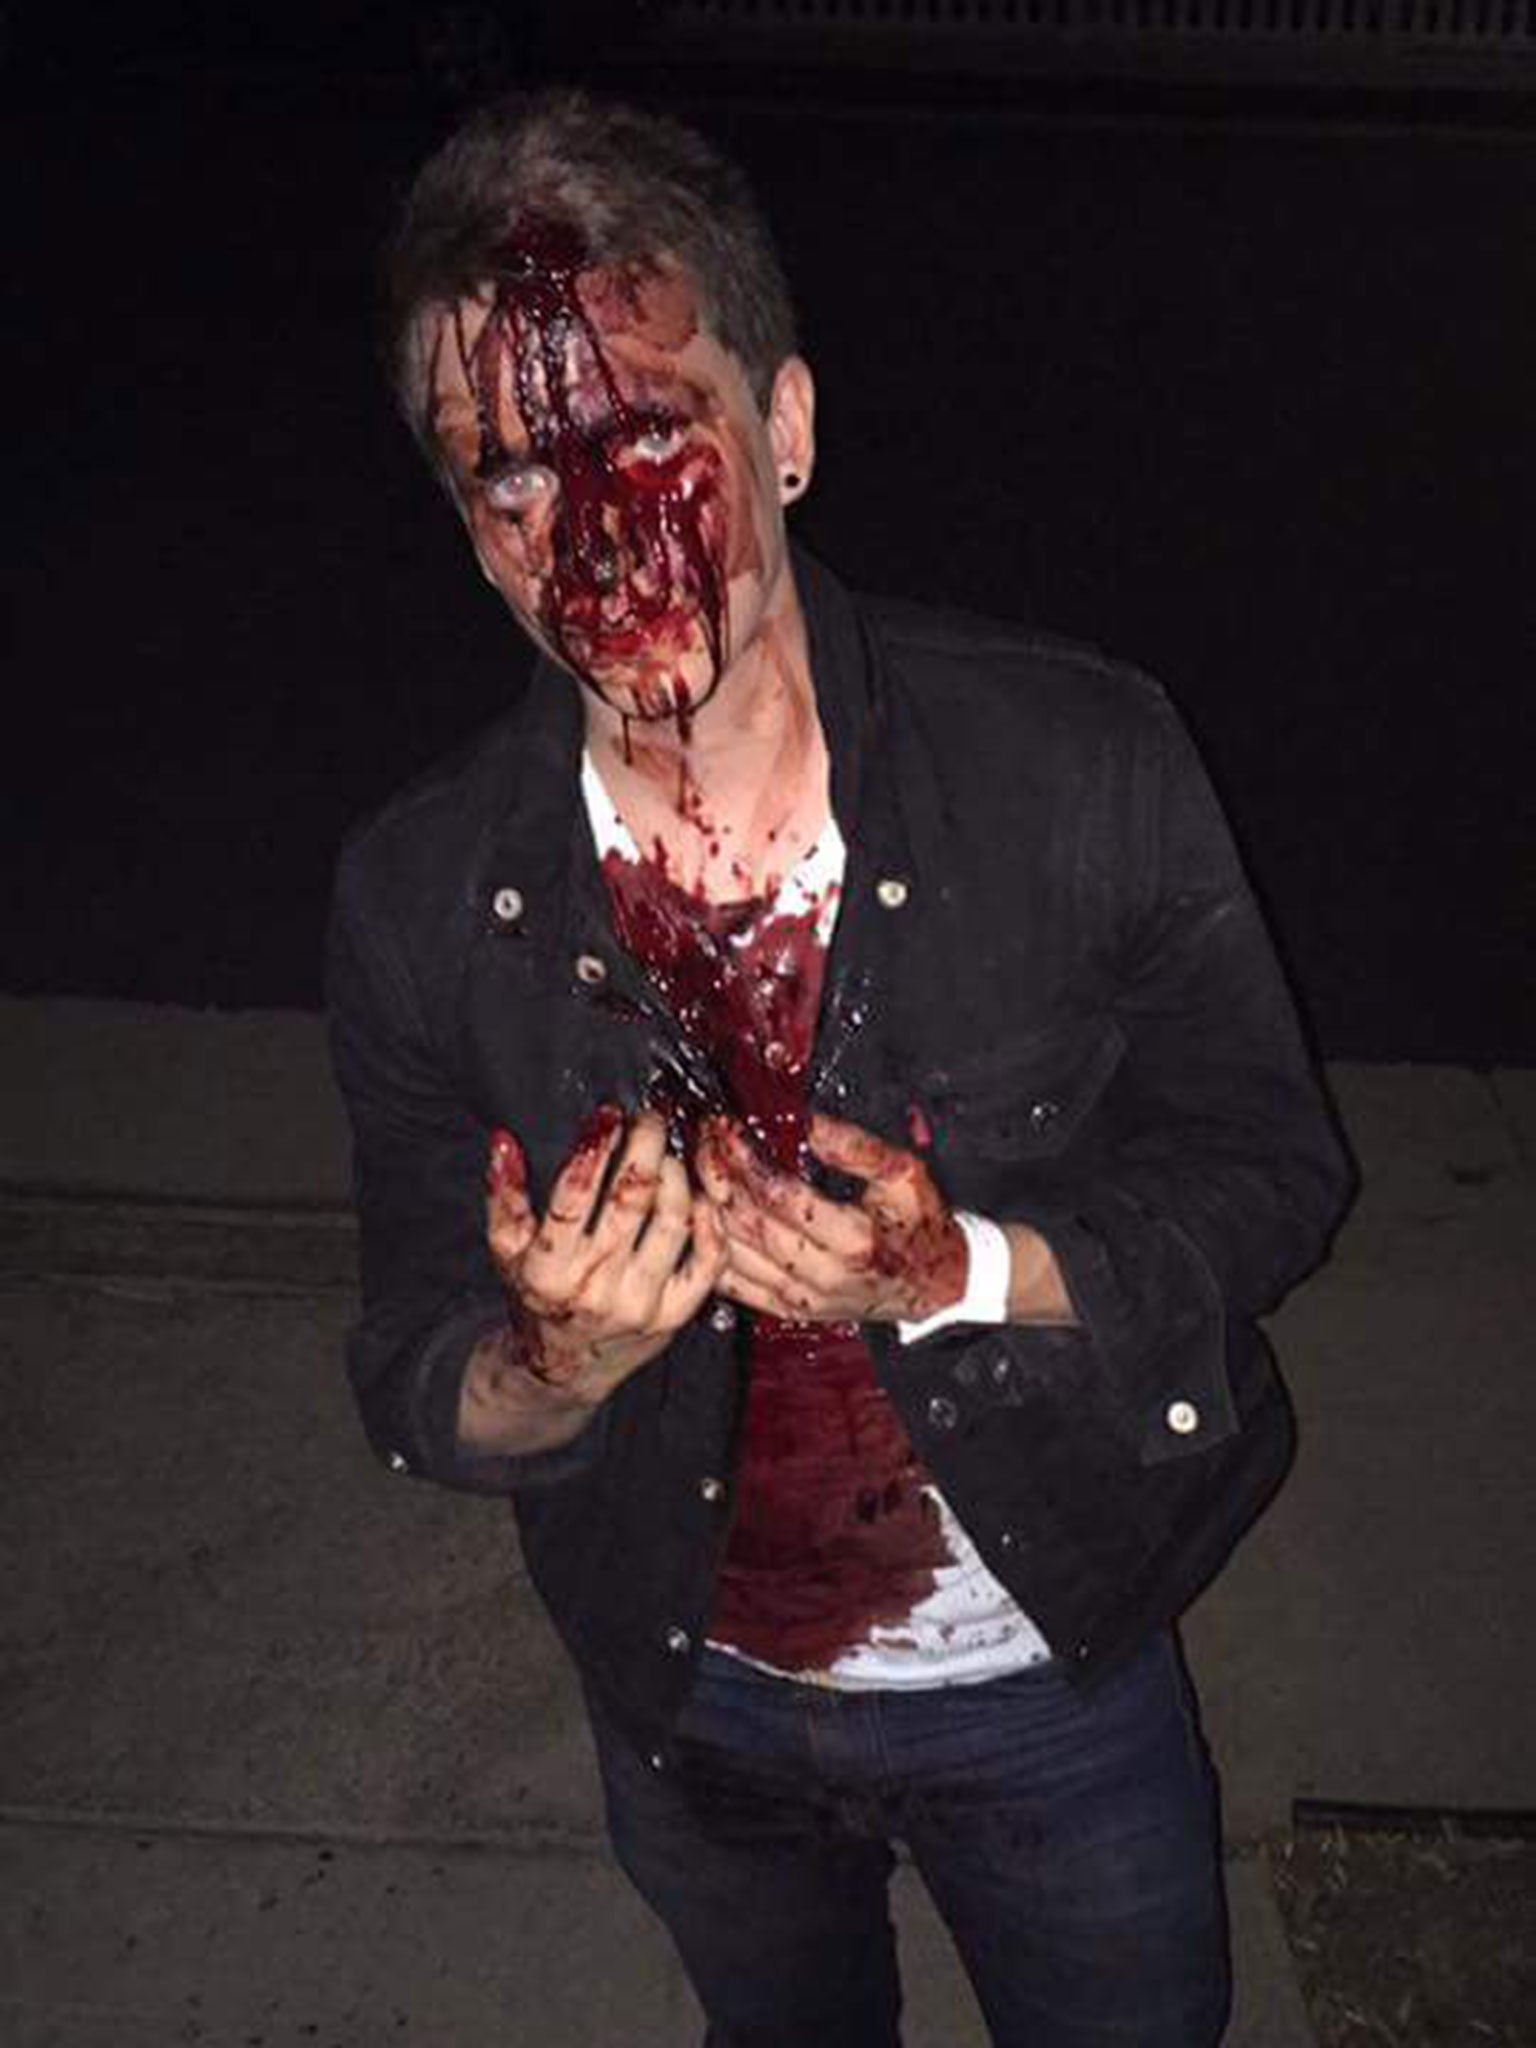 Chris Ball, a fim producer from Calgary, was attacked in Santa Monica on the night of the US election